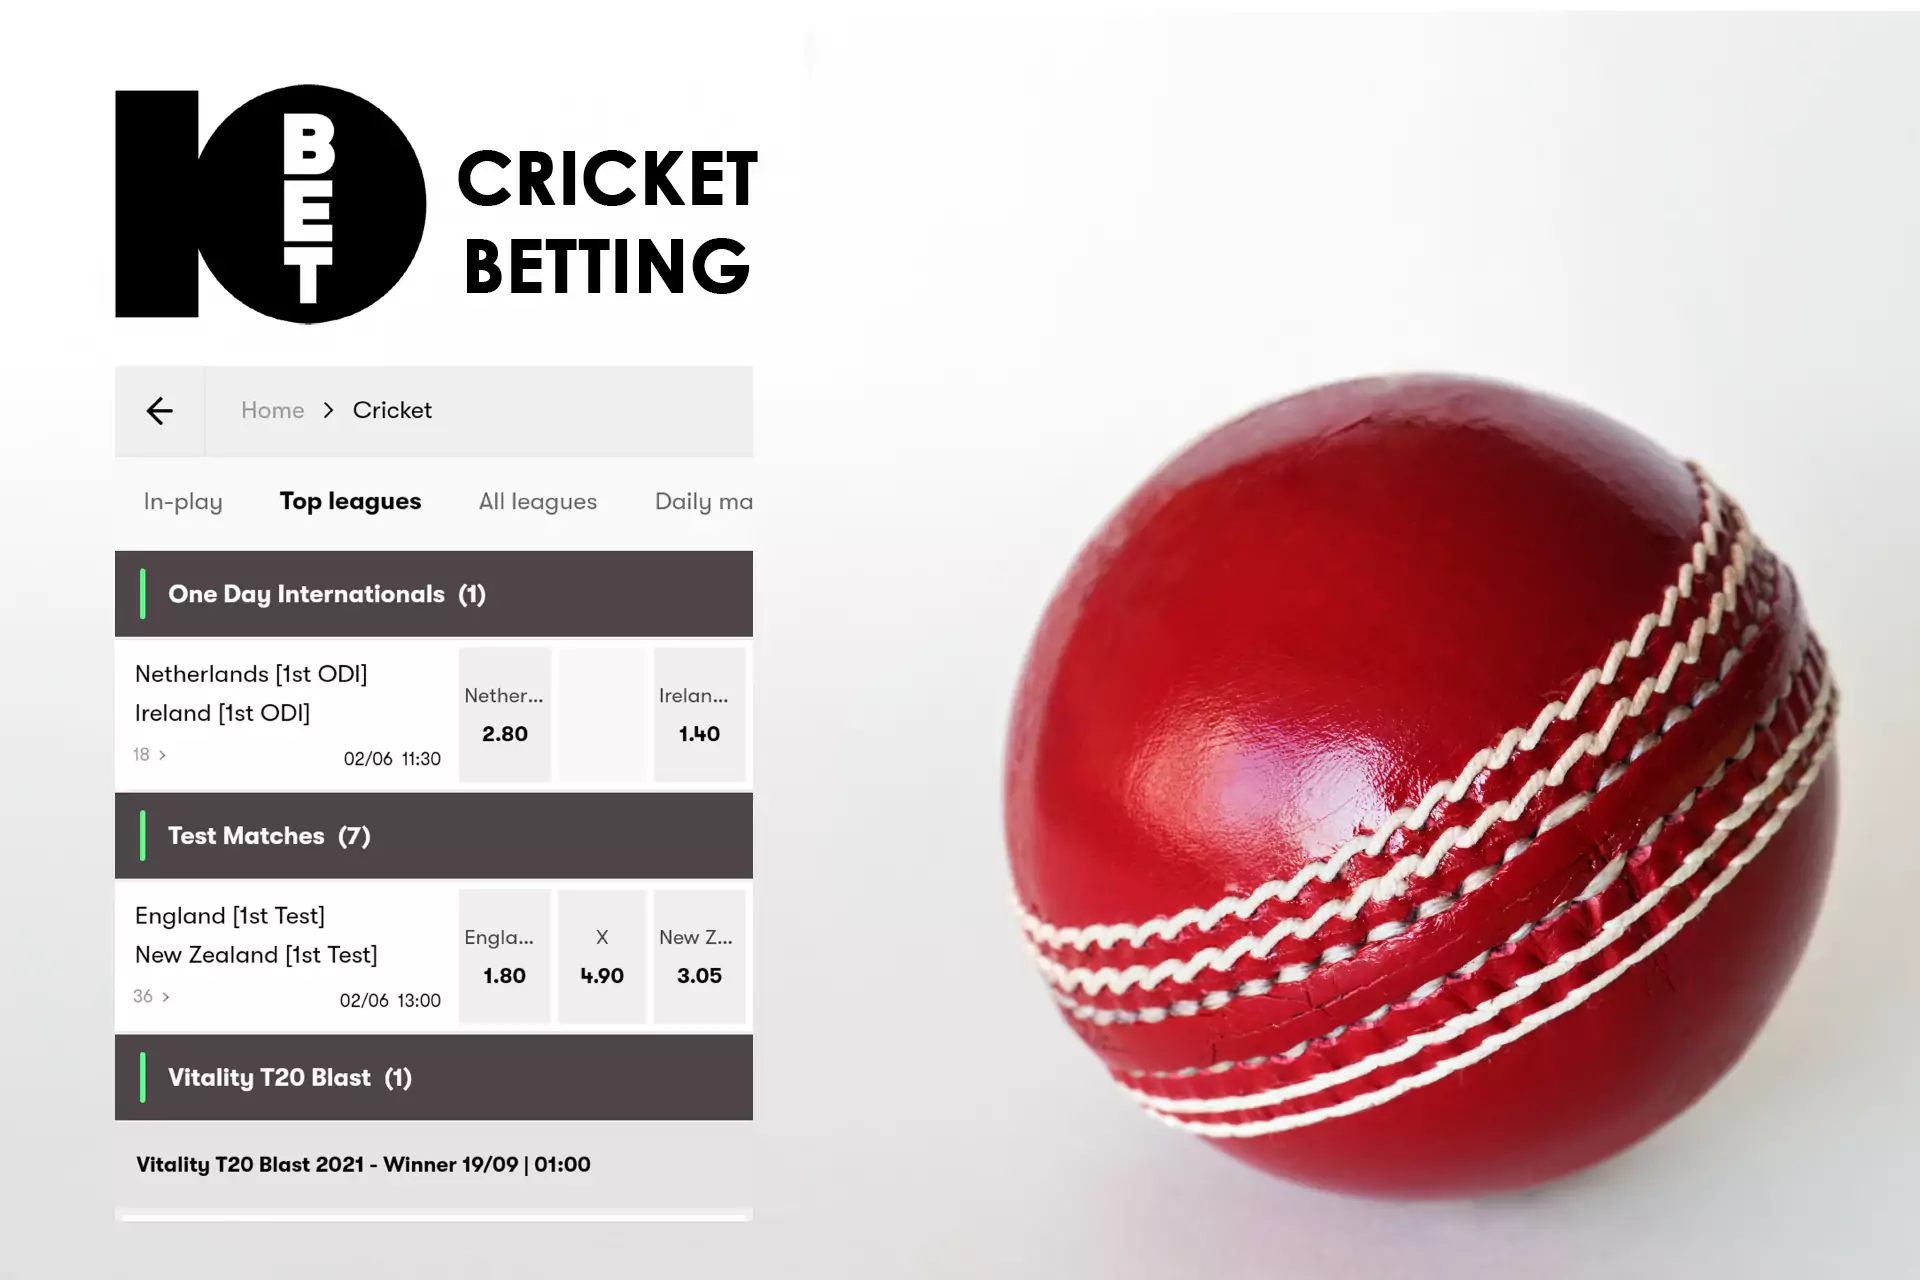 Cricket betting is a popular feature on the 10bet service.